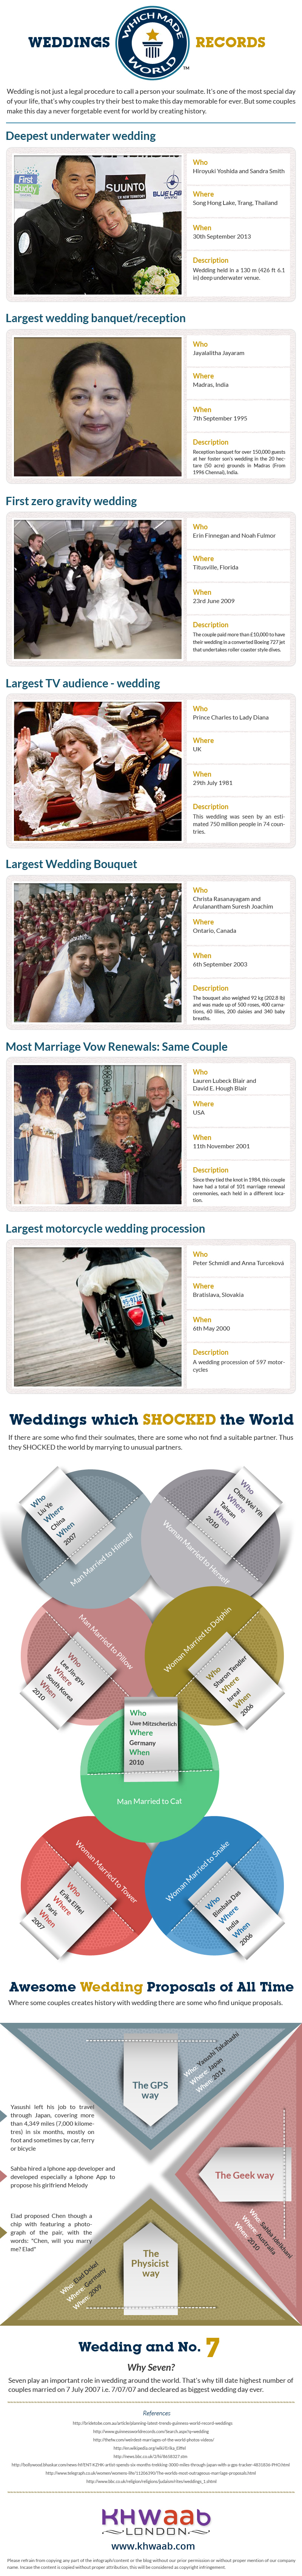 Weddings That Made World Records [Infographic]